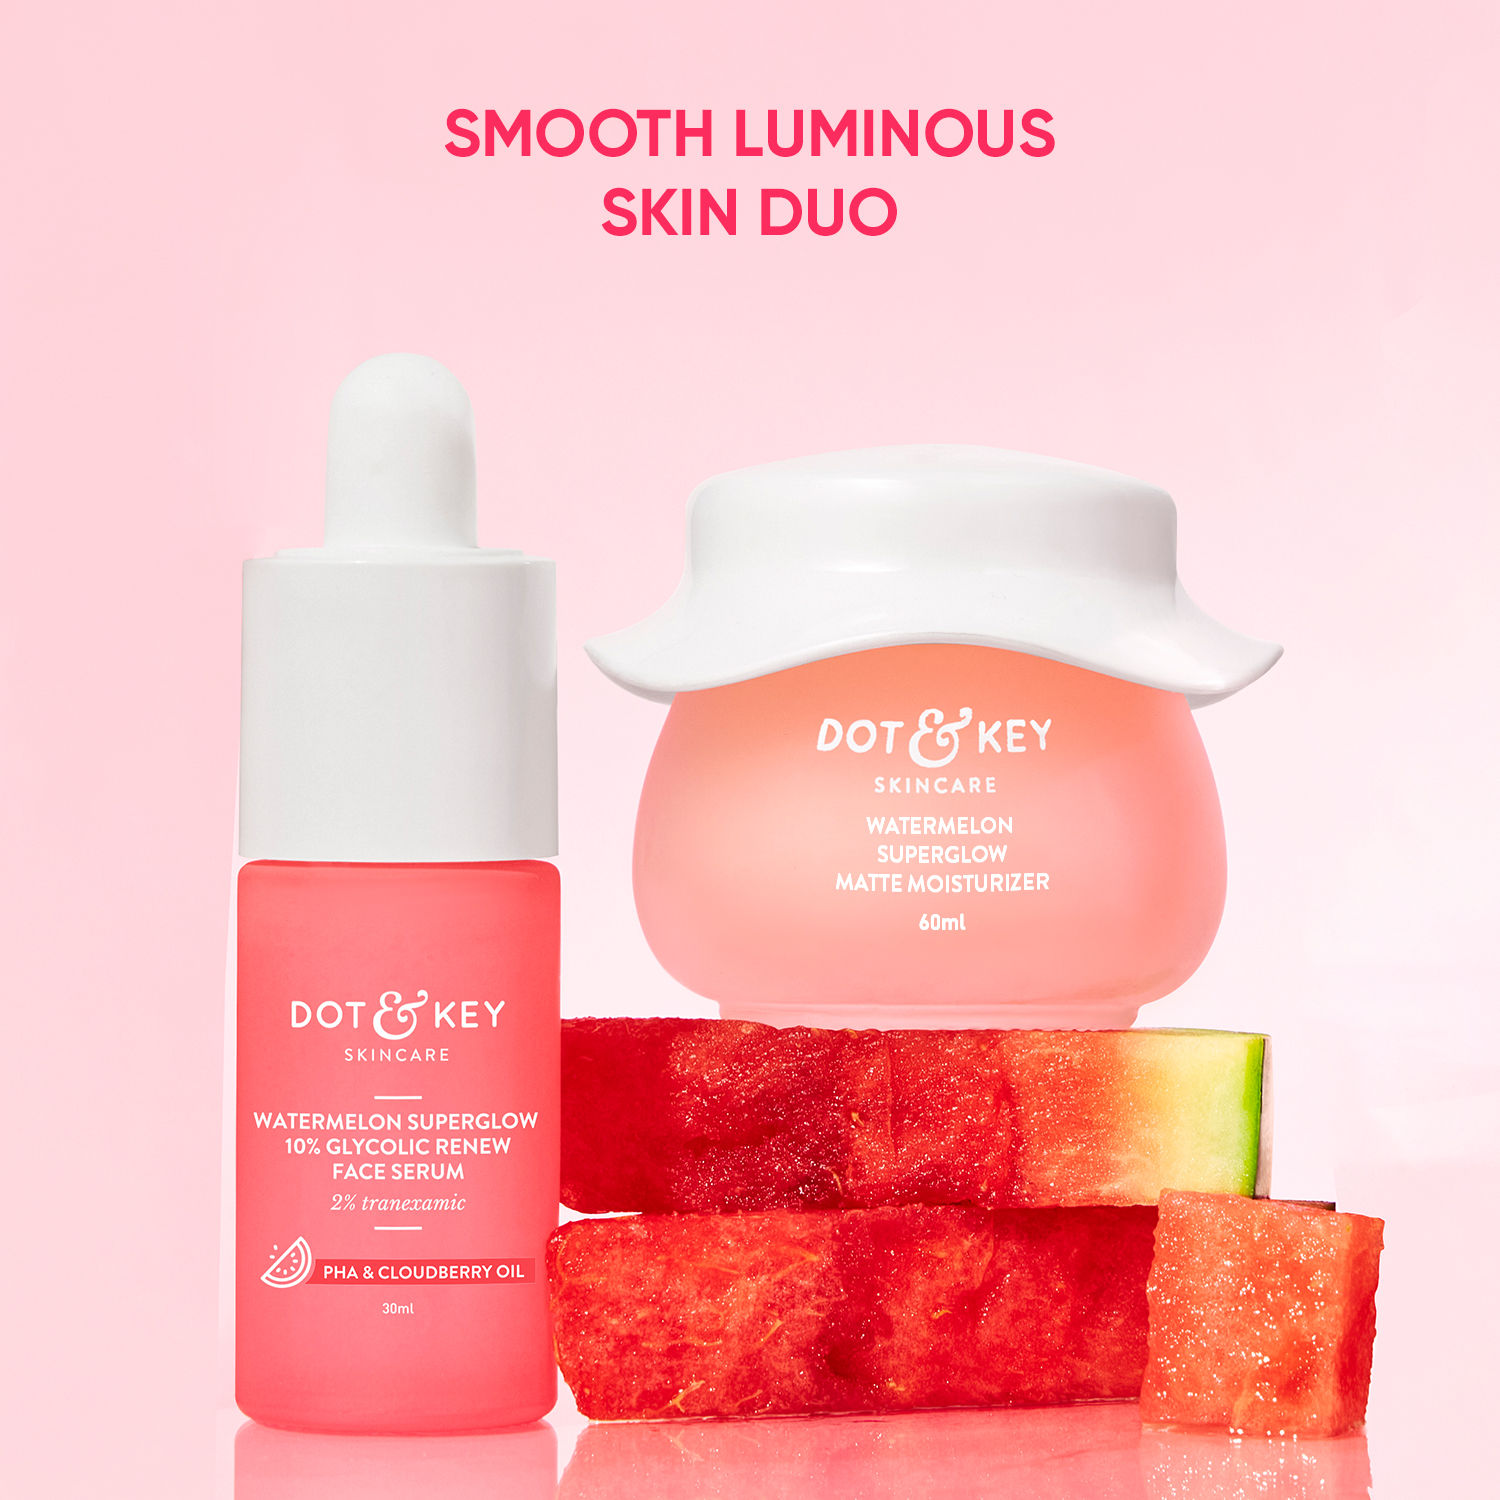 Buy Dot & Key Watermelon Super Glow Face Care Gift Set for Glowing Skin - 90g | Face serum, Moisturizer - Purplle